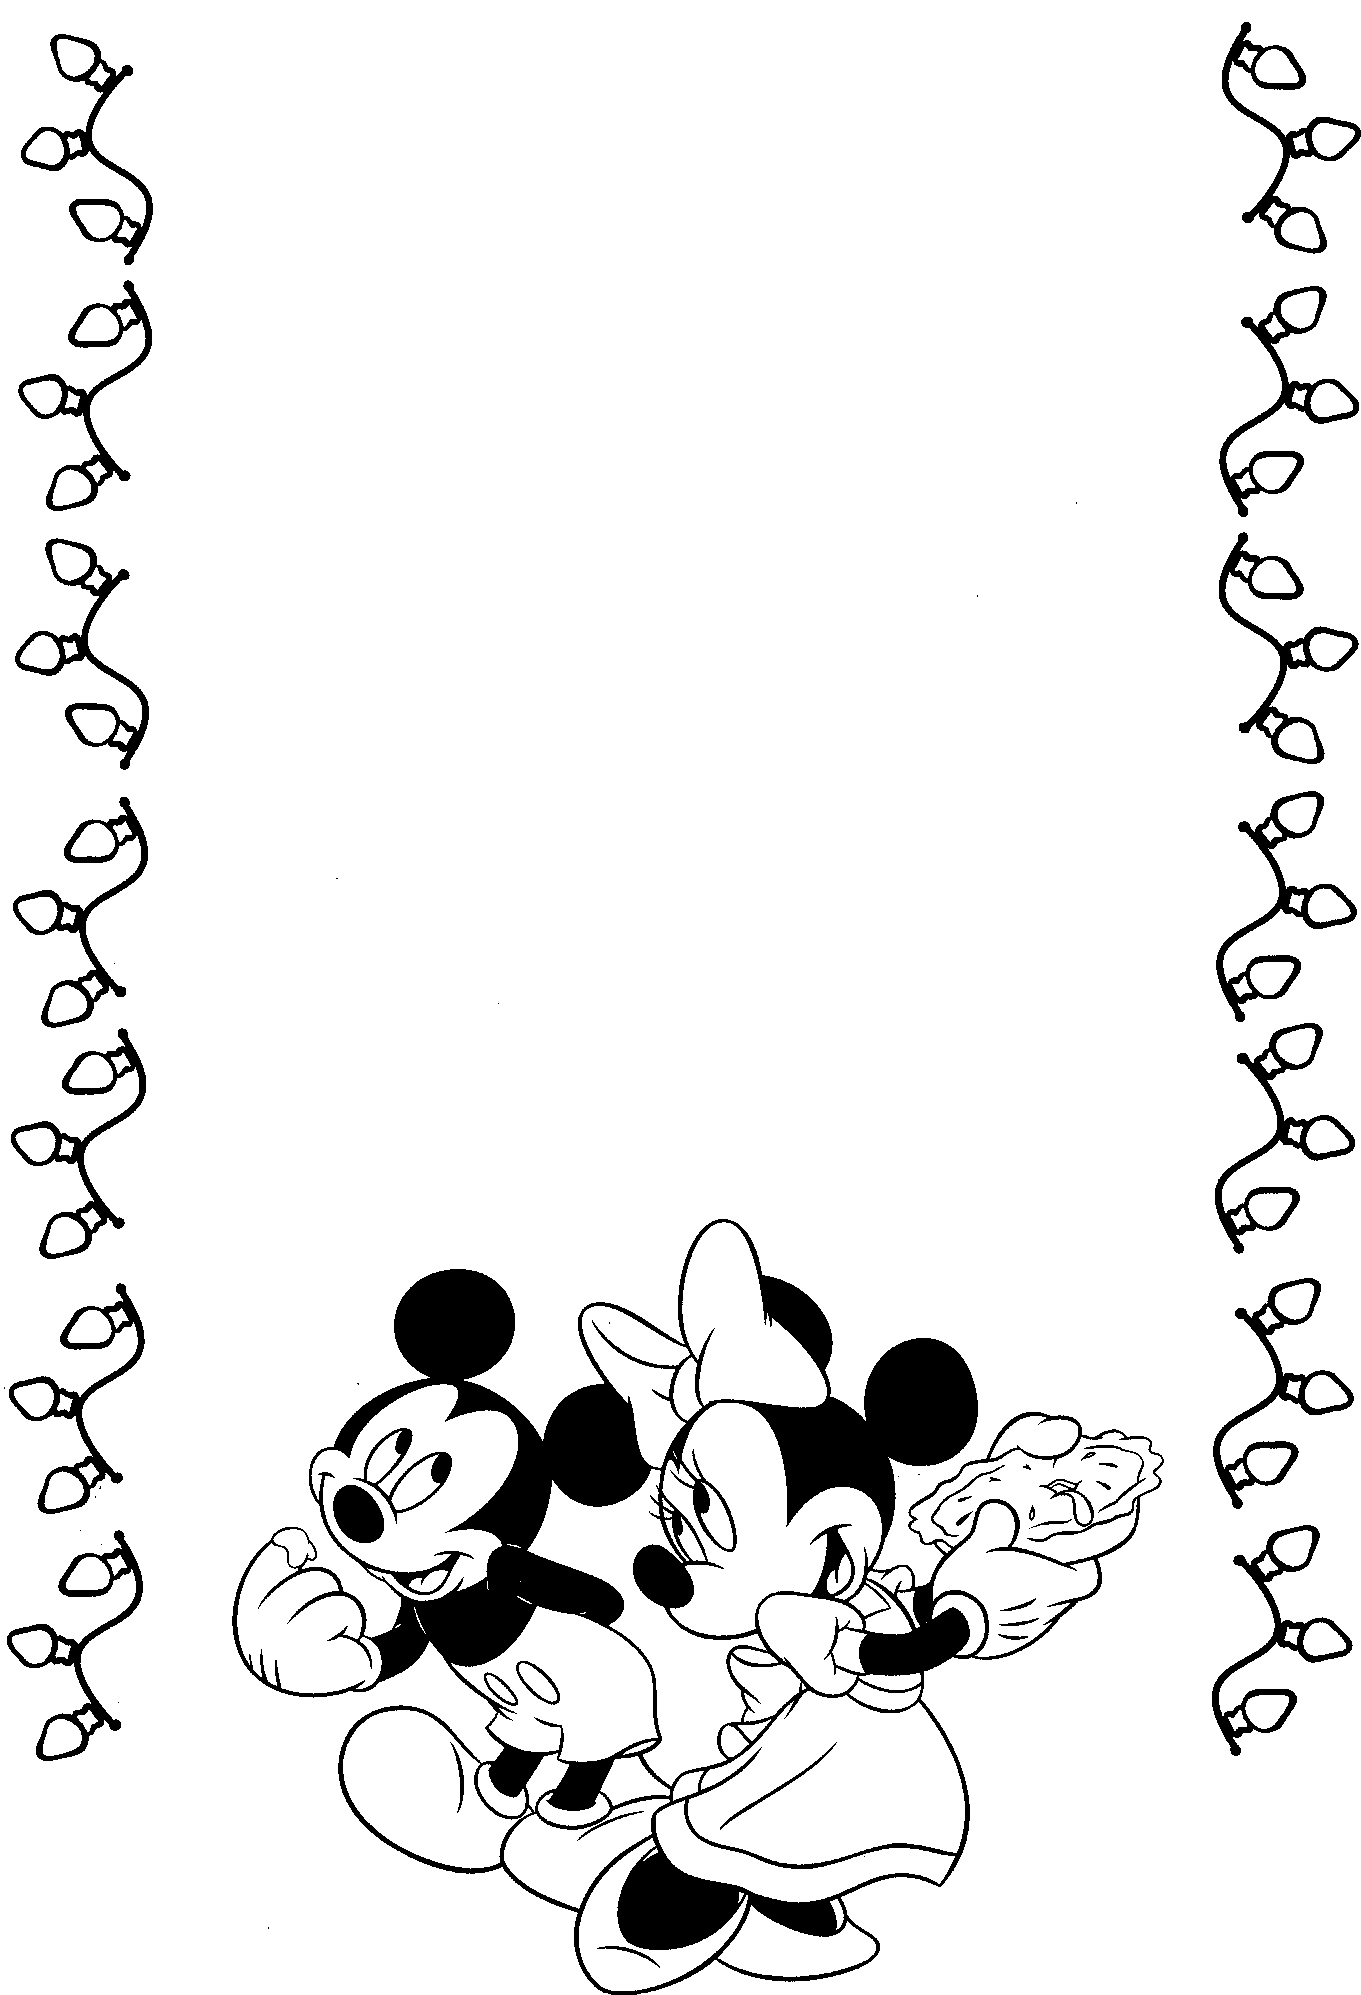 Printable Disney Christmas Stationery featuring Mickey and Minnie ...